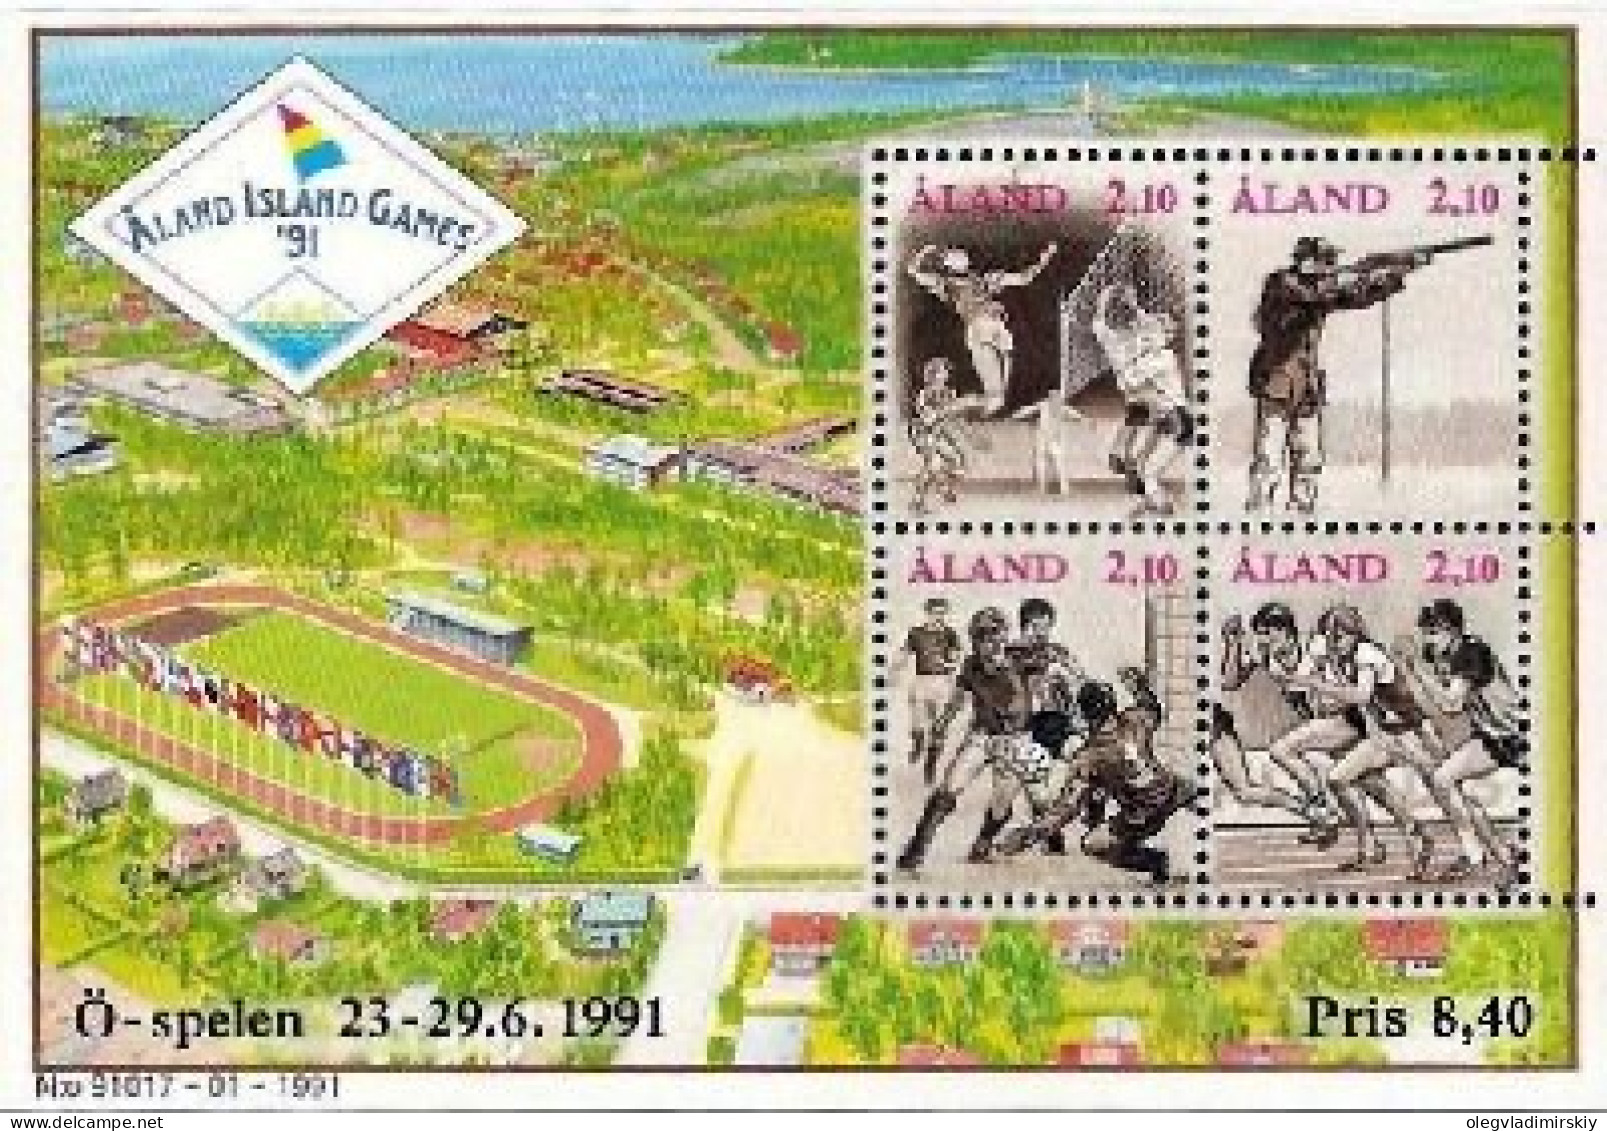 Aland Islands Åland Finland 1991 Aland Island Games Football Soccer Volleyball Etc Set Of 4 Stamps In Block Mint - Volley-Ball